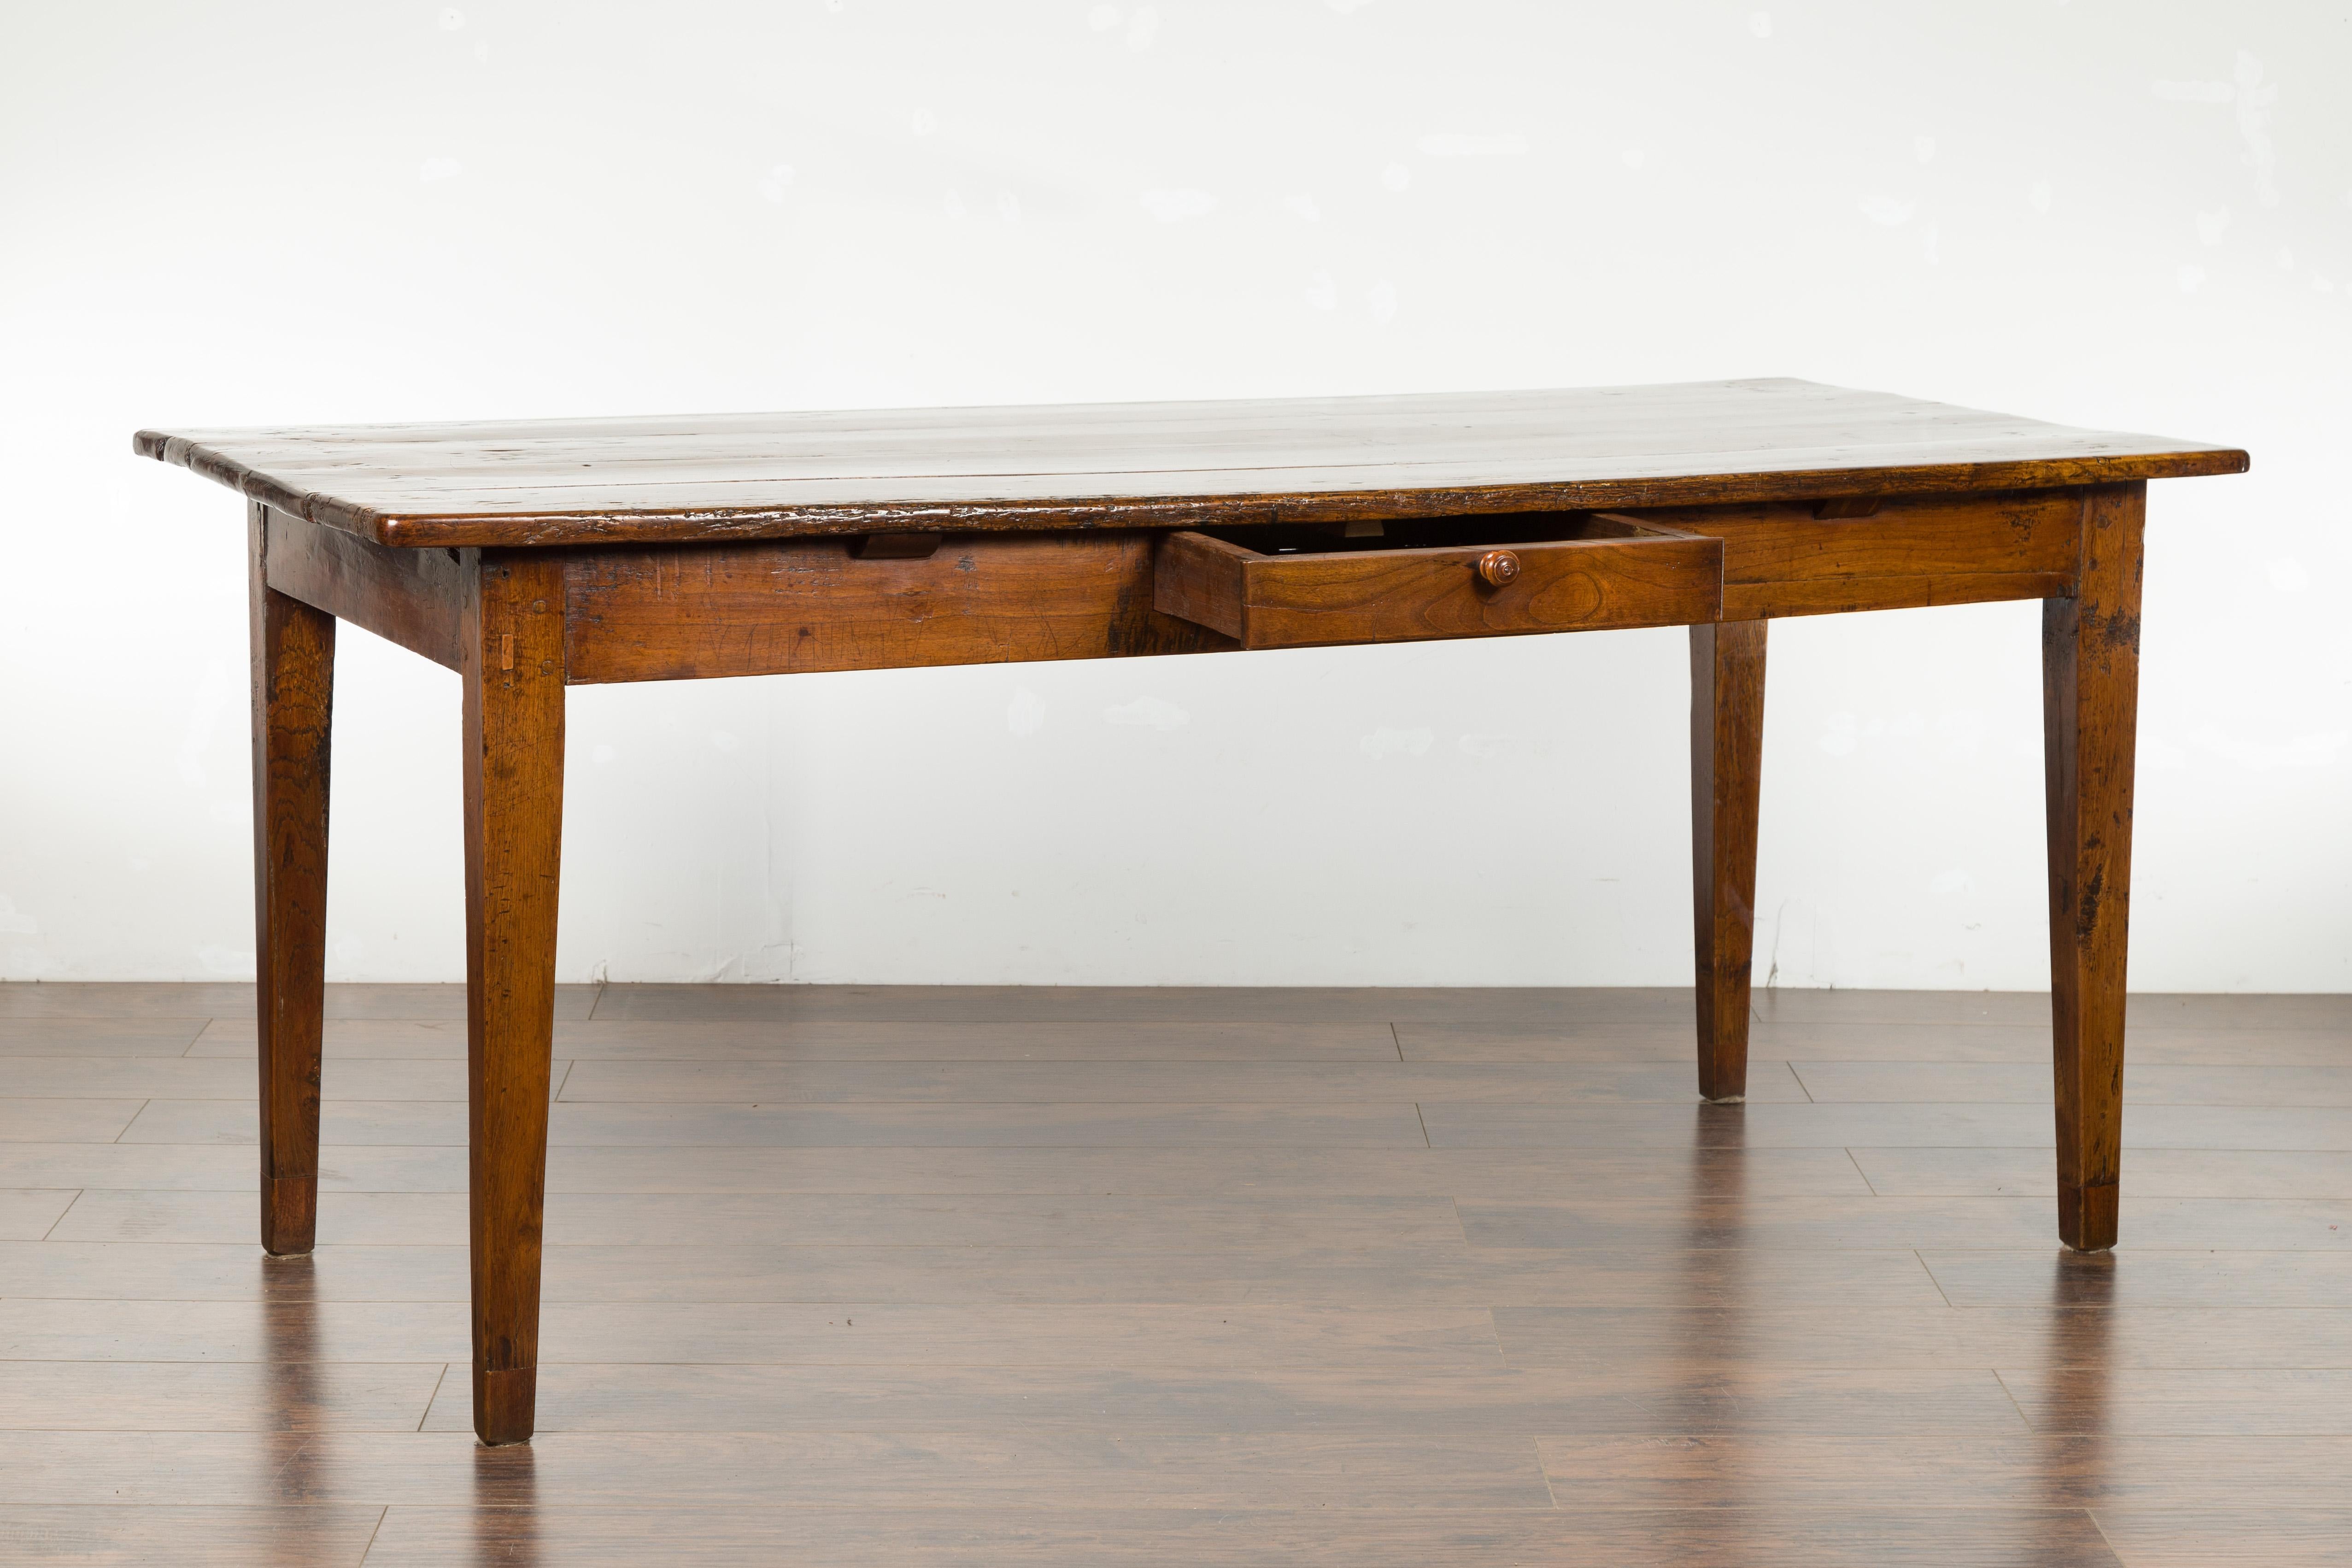 English 1870s Rustic Elm Farm Table with Single Drawer and Tapered Legs 8